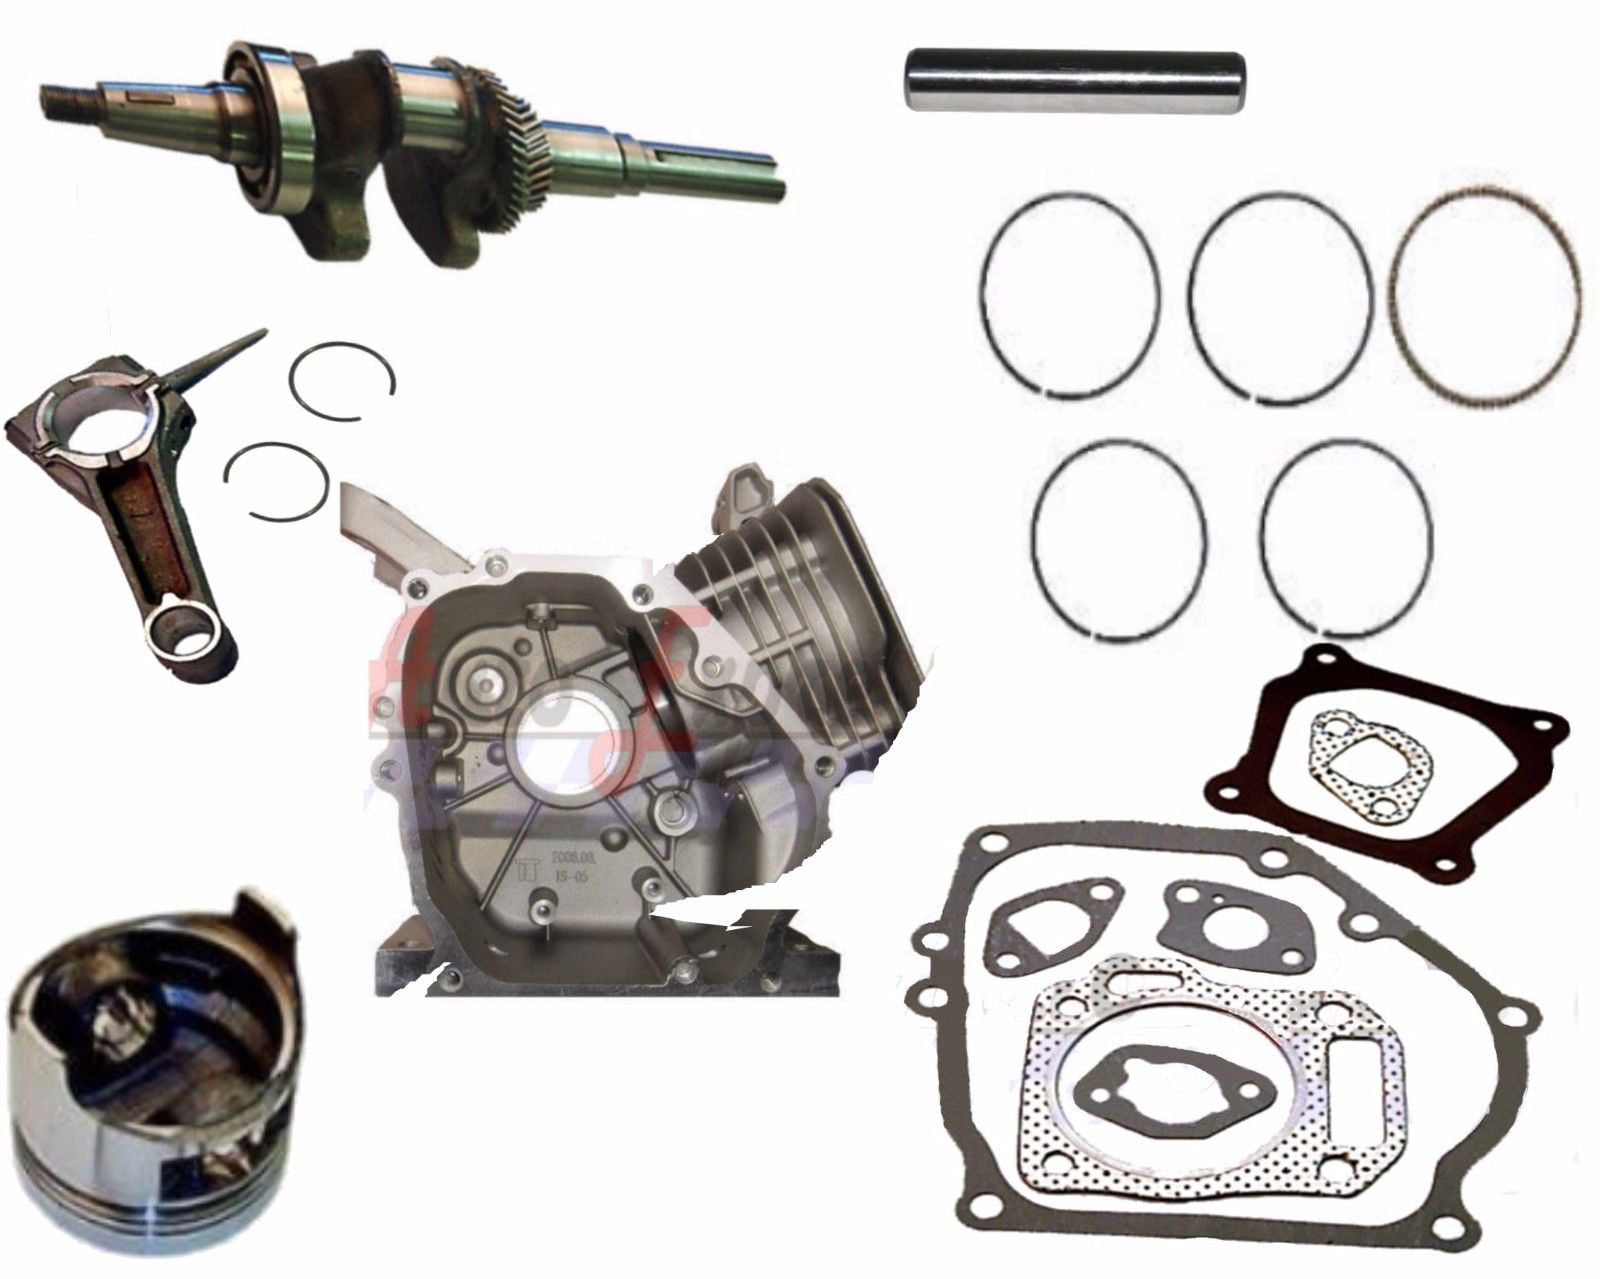 Complete Engine Rebuild Kit Piston Cylinder Head Assembly For Honda GX160 5.5HP 